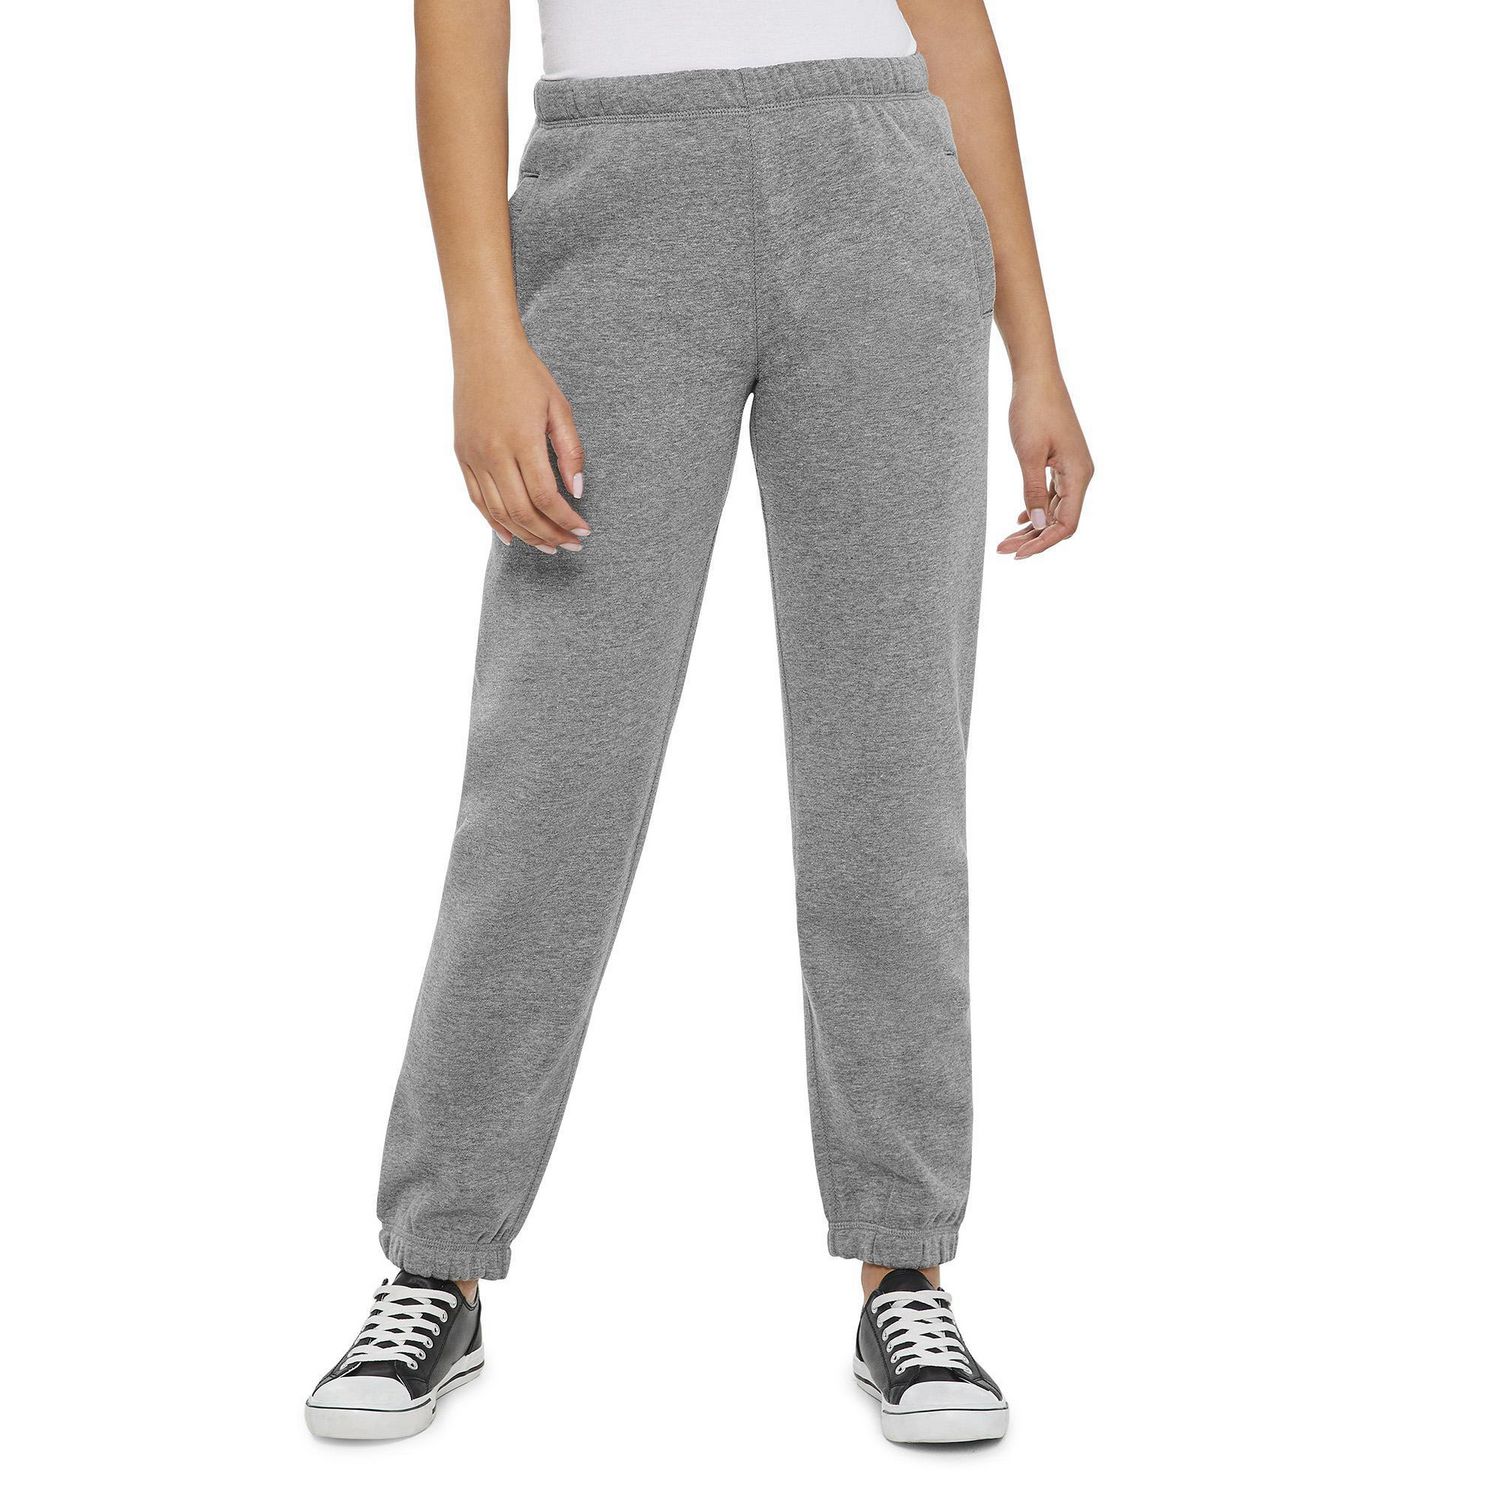 G.W. Gray Sweatpants Women's Size Small-Brand New - clothing & accessories  - by owner - apparel sale - craigslist